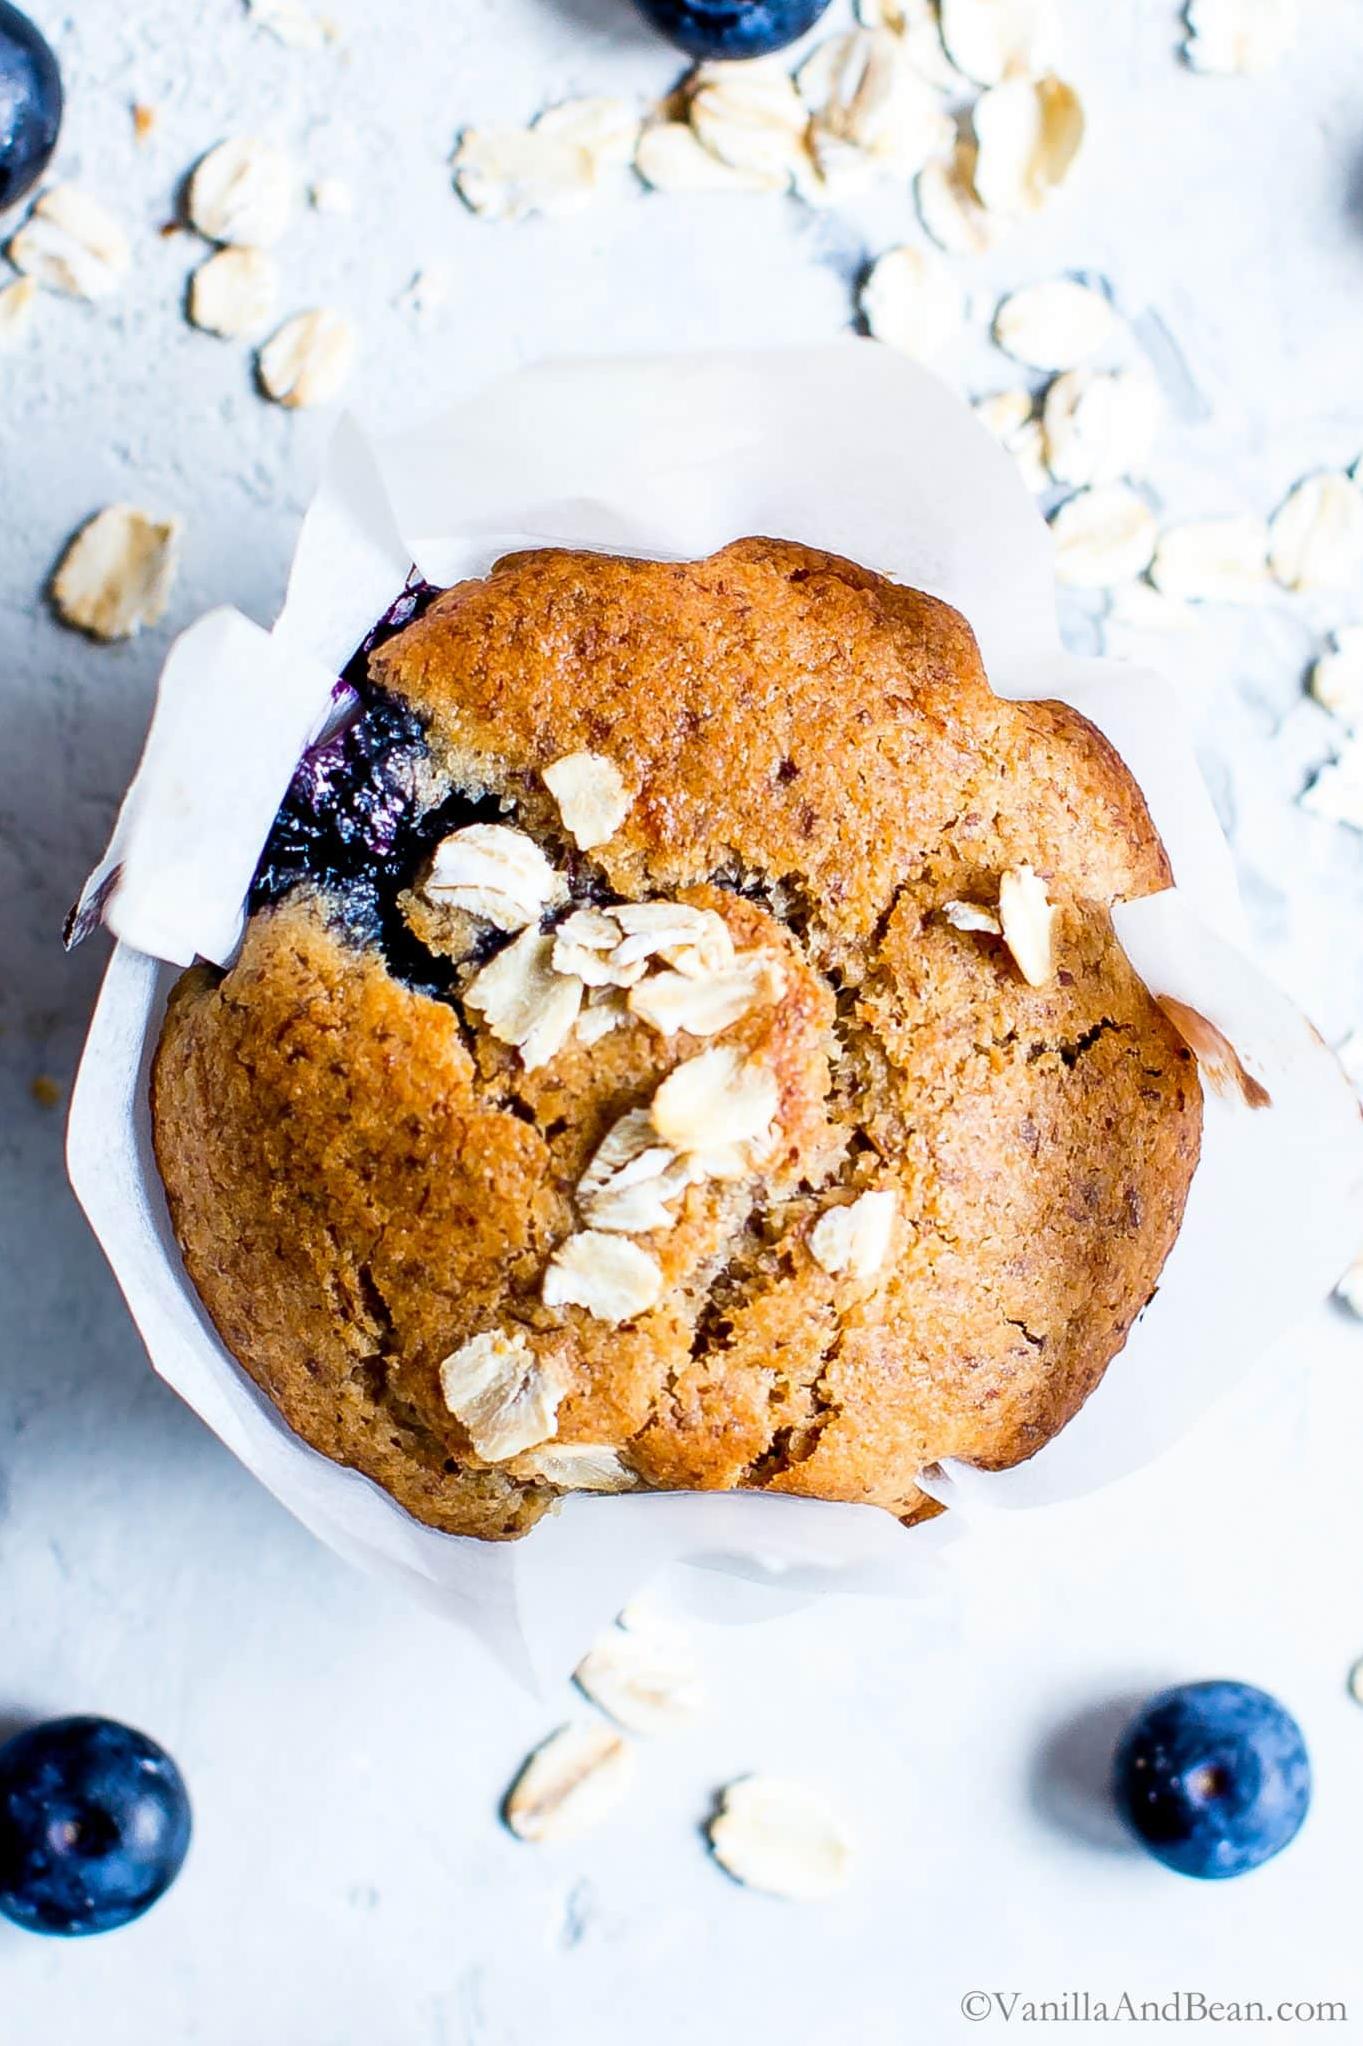 Delicious & Nutritious: Spiced Flax Blueberry Muffins Recipe